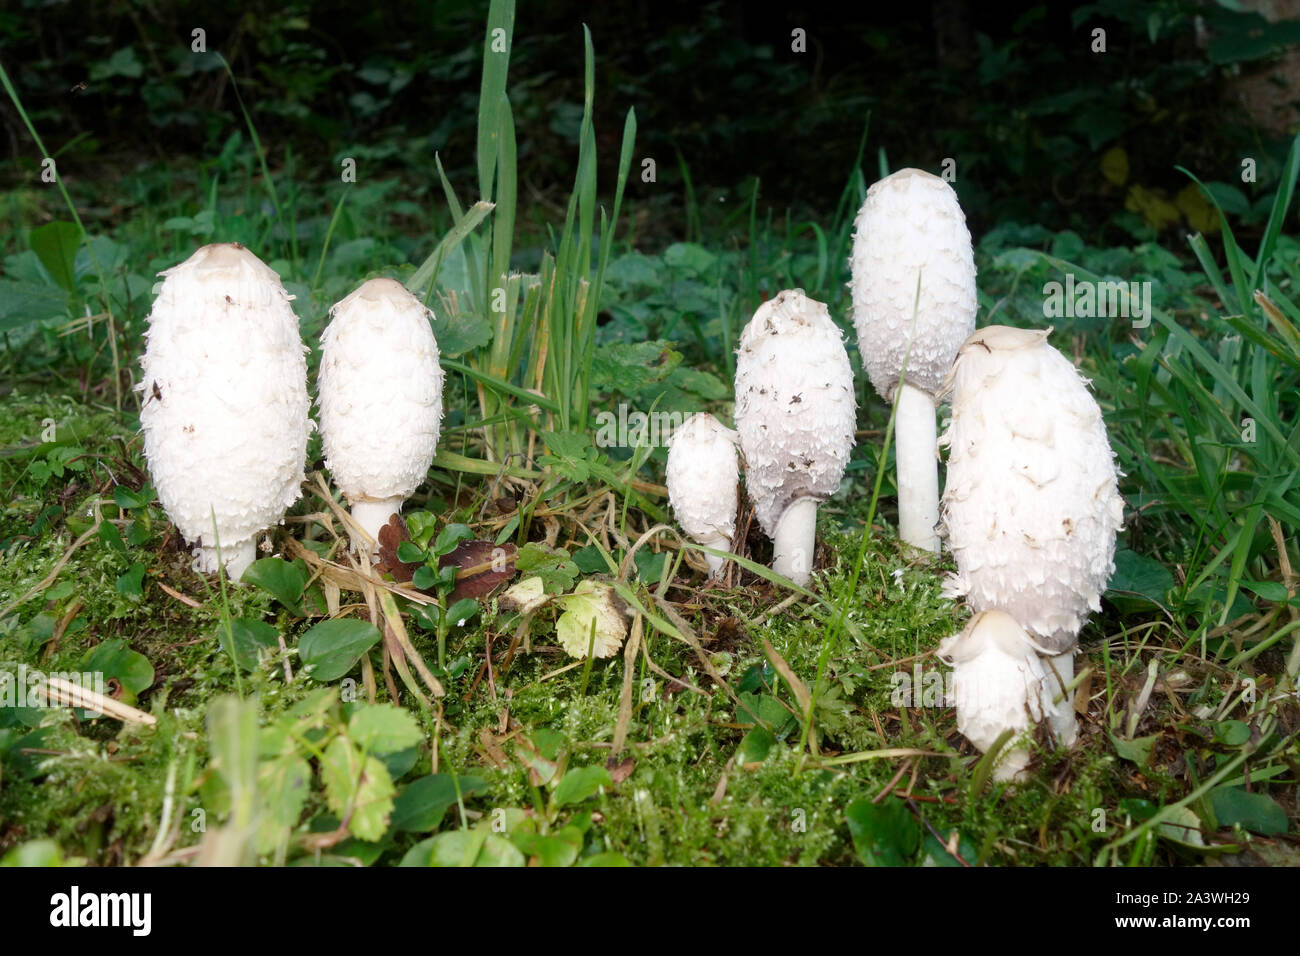 E dible mushroom Coprinus comatus, localy caled the shaggy ink cap; lawyer's wig; or shaggy mane. Stock Photo